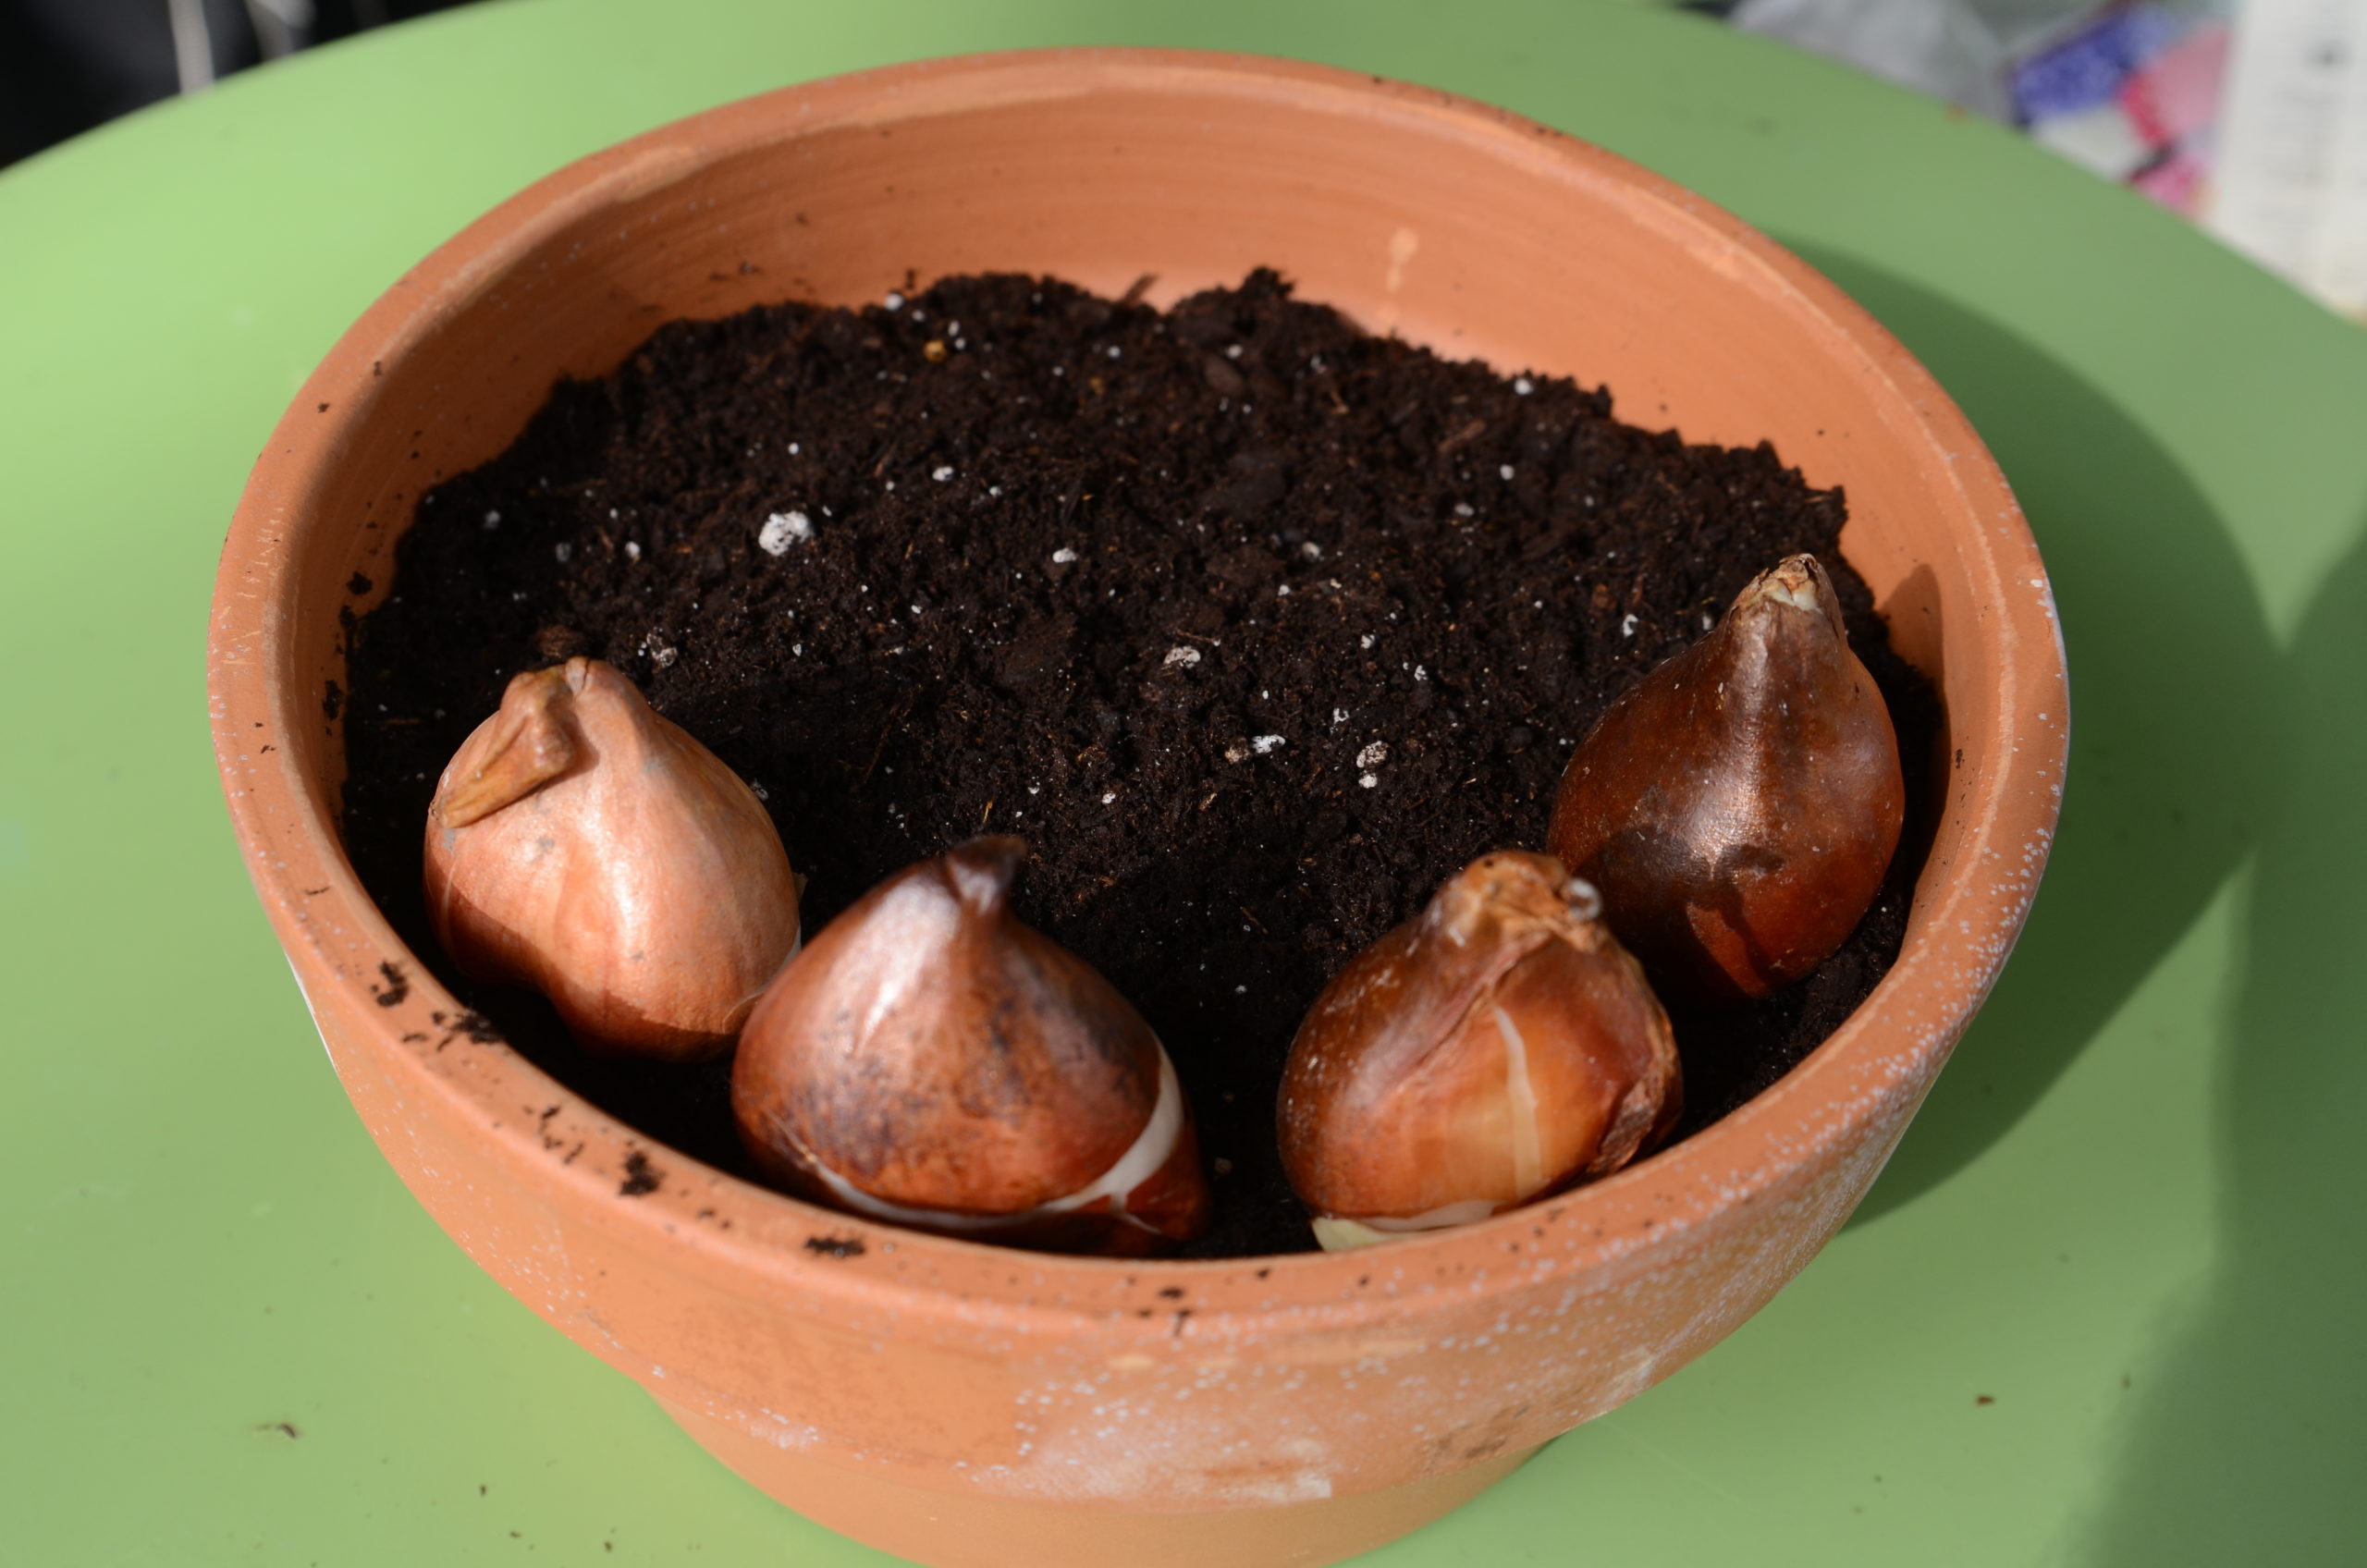 A 10-inch bulb pan (clay) filled with lightly moistened Pro-Mix. The initial four tulip bulbs (flat side facing out) are placed for spacing. When completed, the pot will hold 11 bulbs.